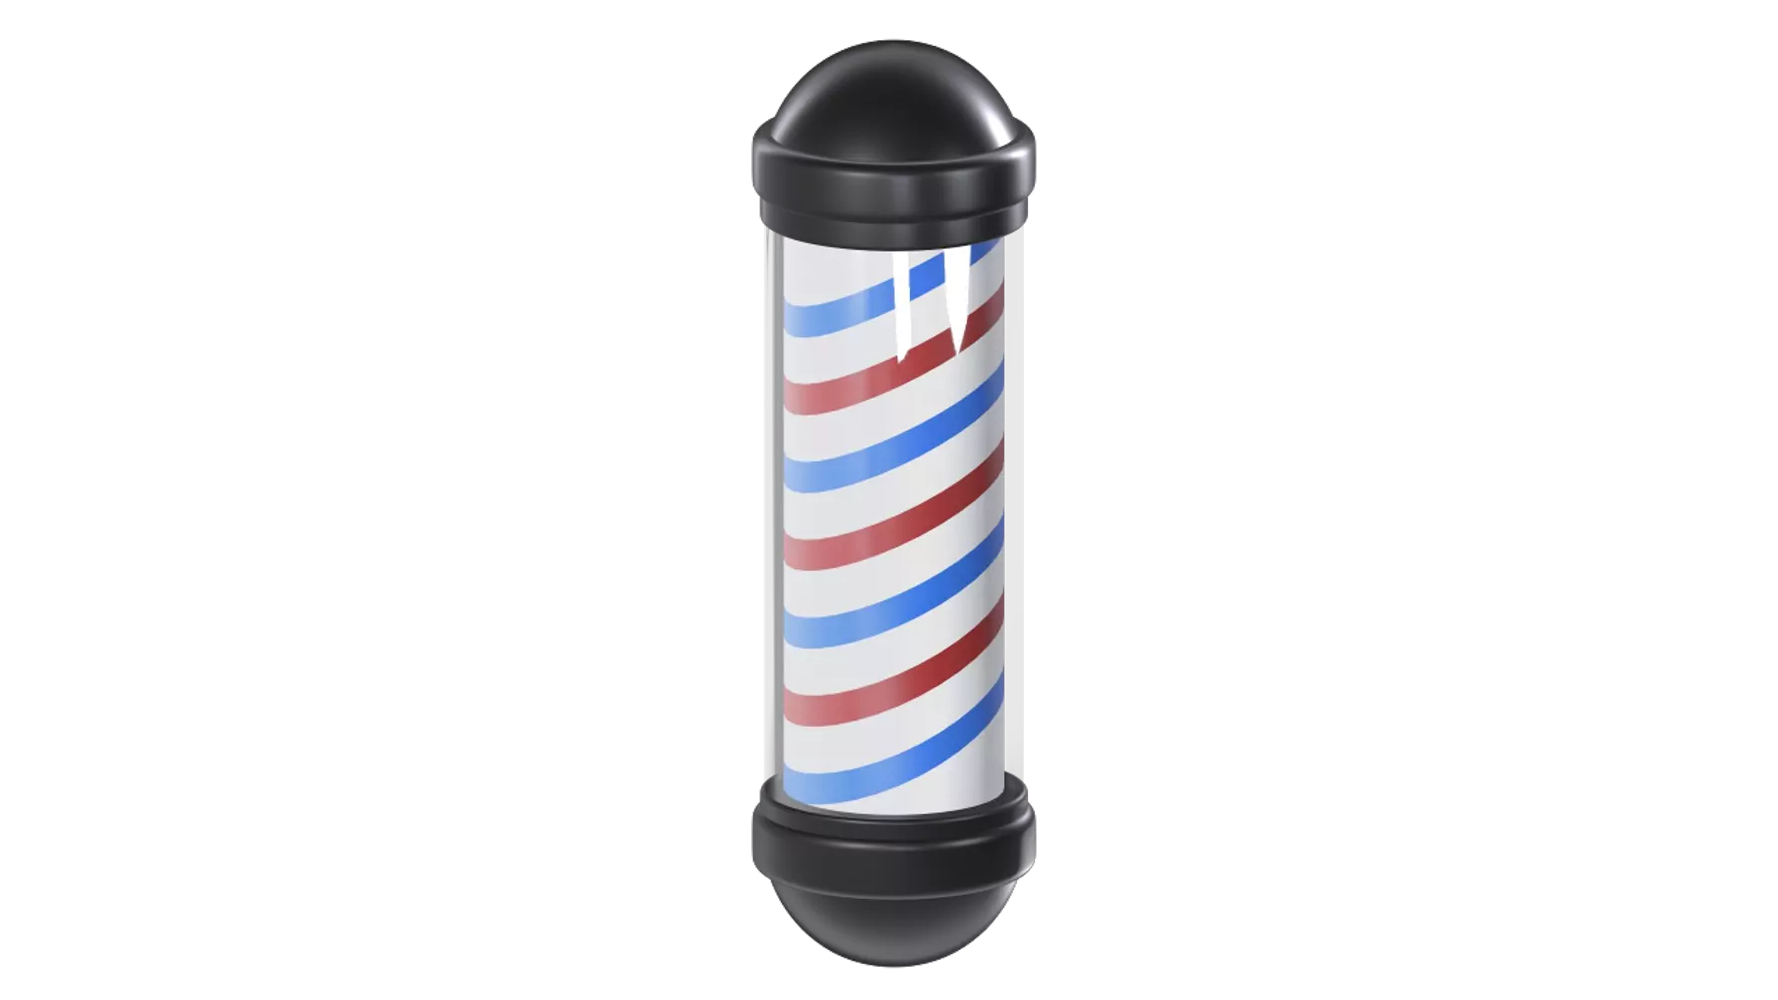 Barber Pole 3D Graphic